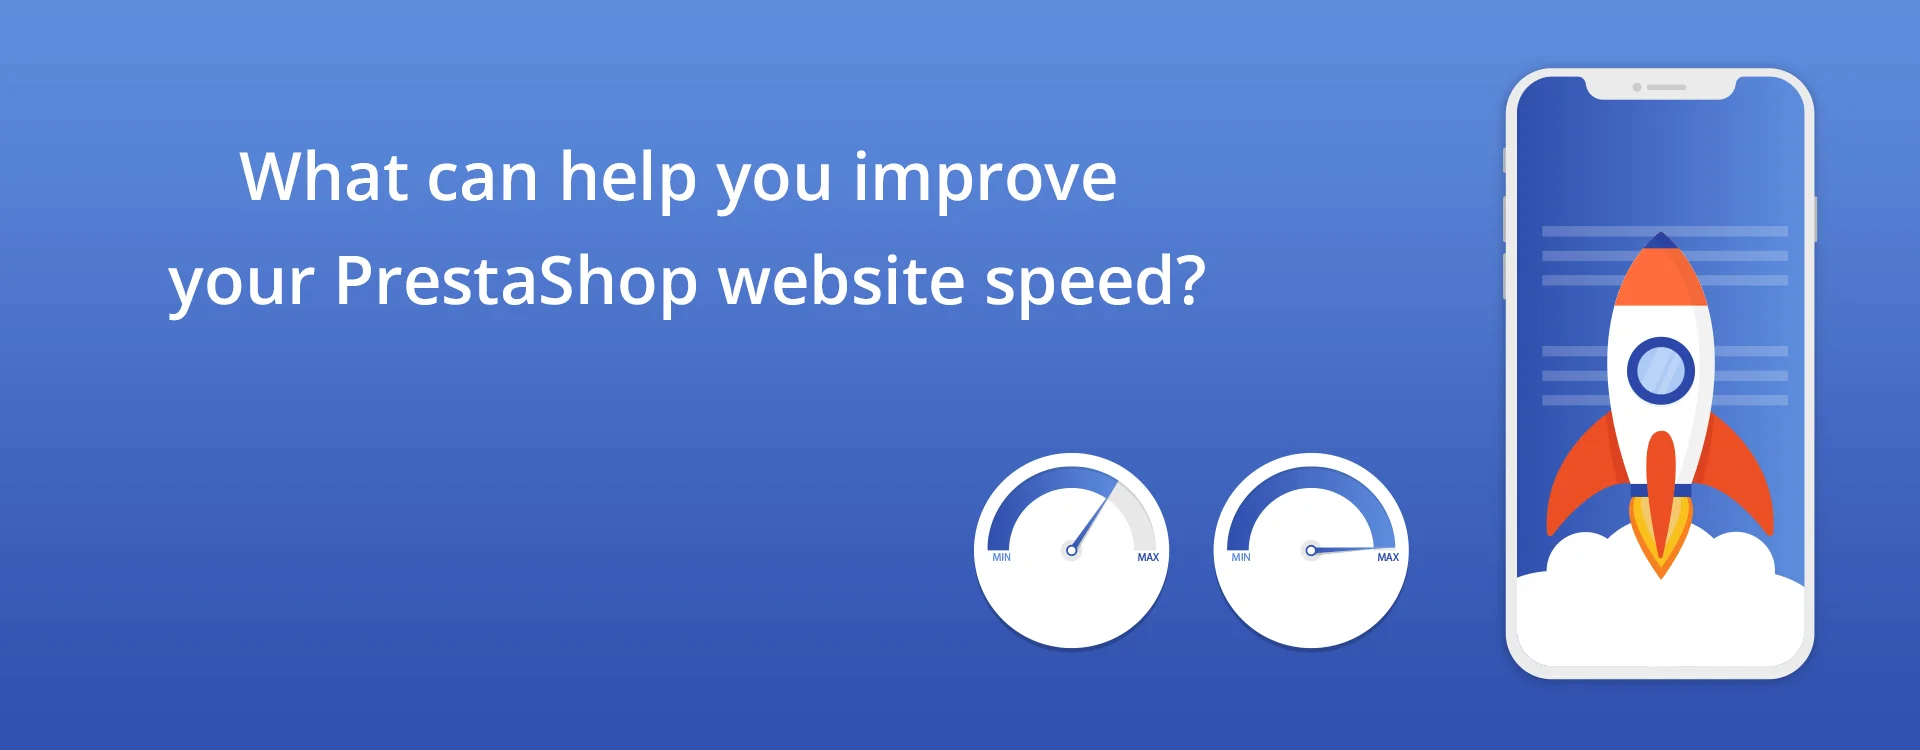 What can help you improve your PrestaShop website speed?